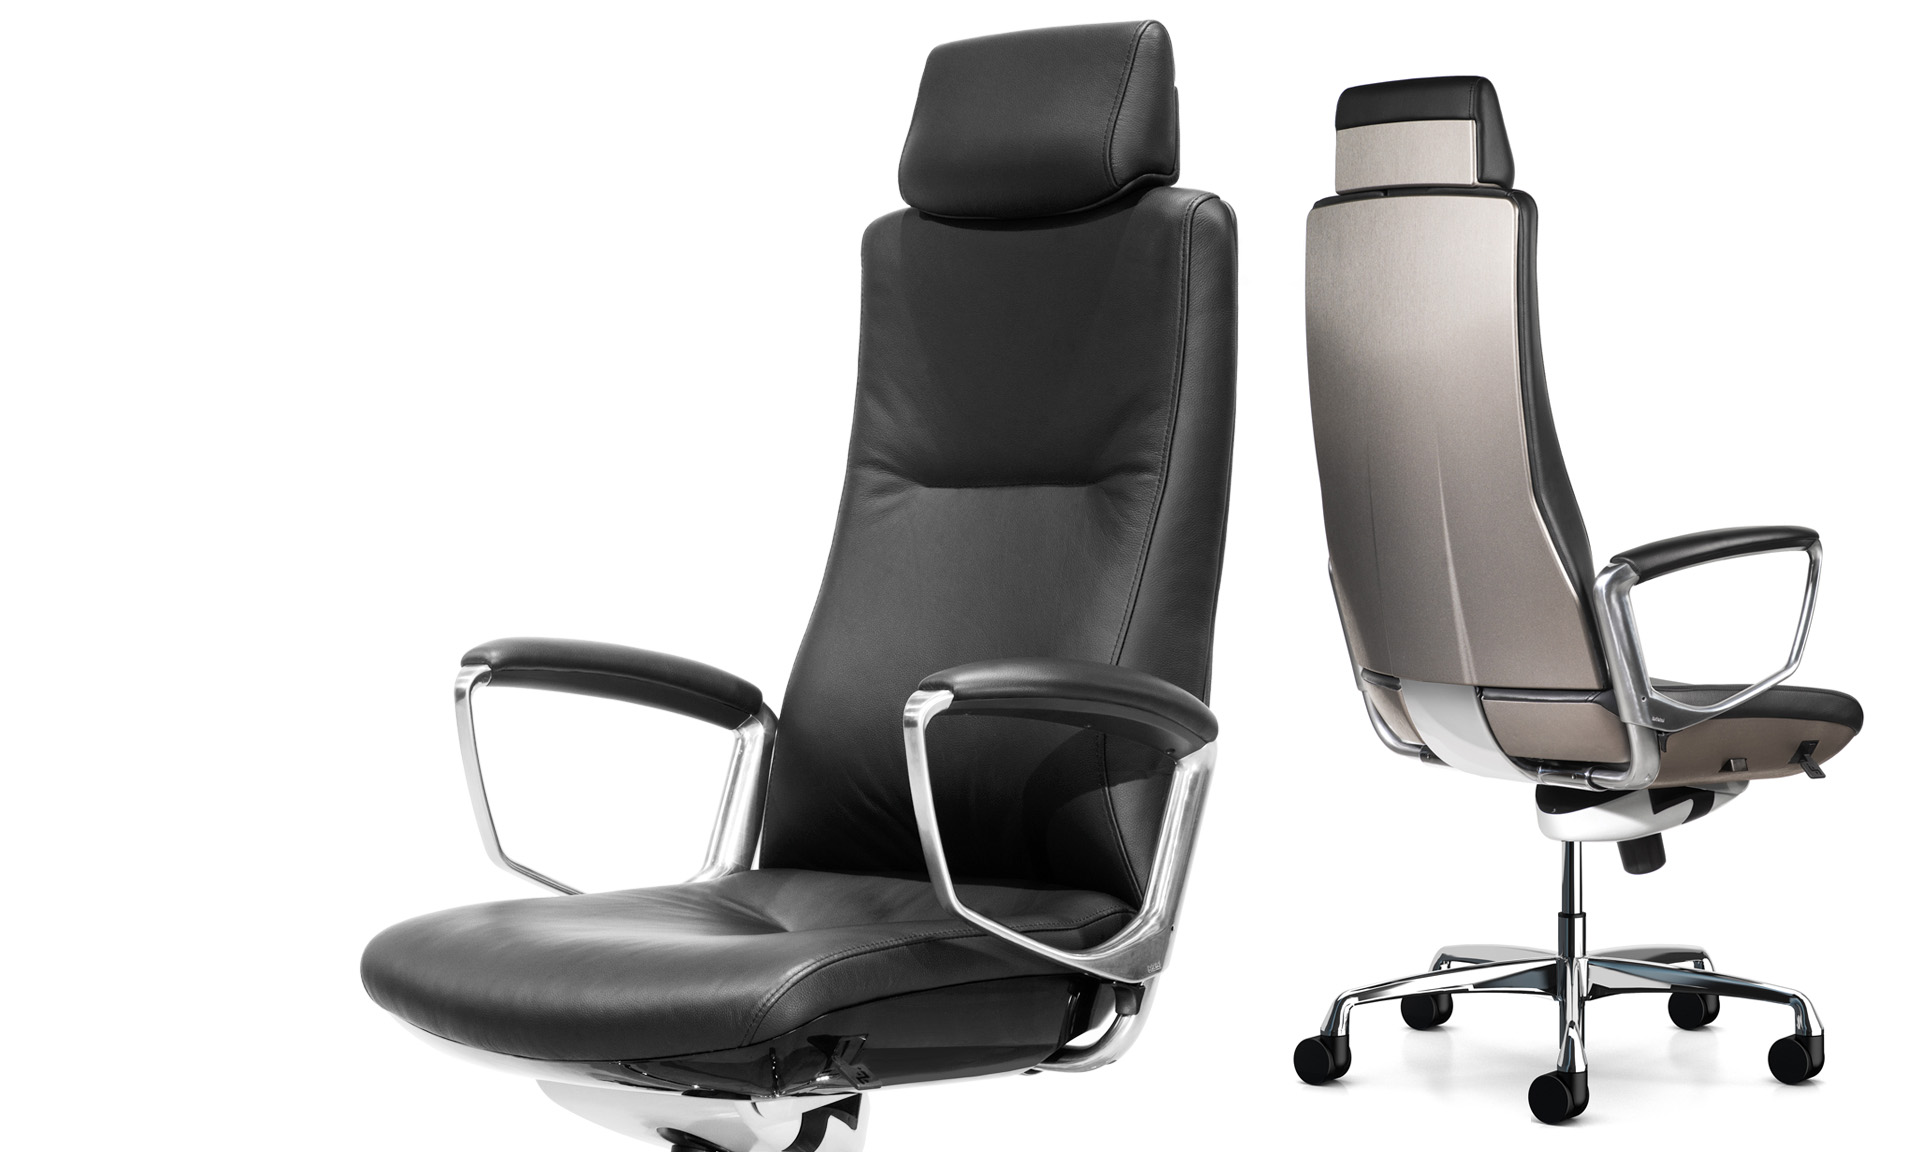 Liven office chair in black leather showing front and back view